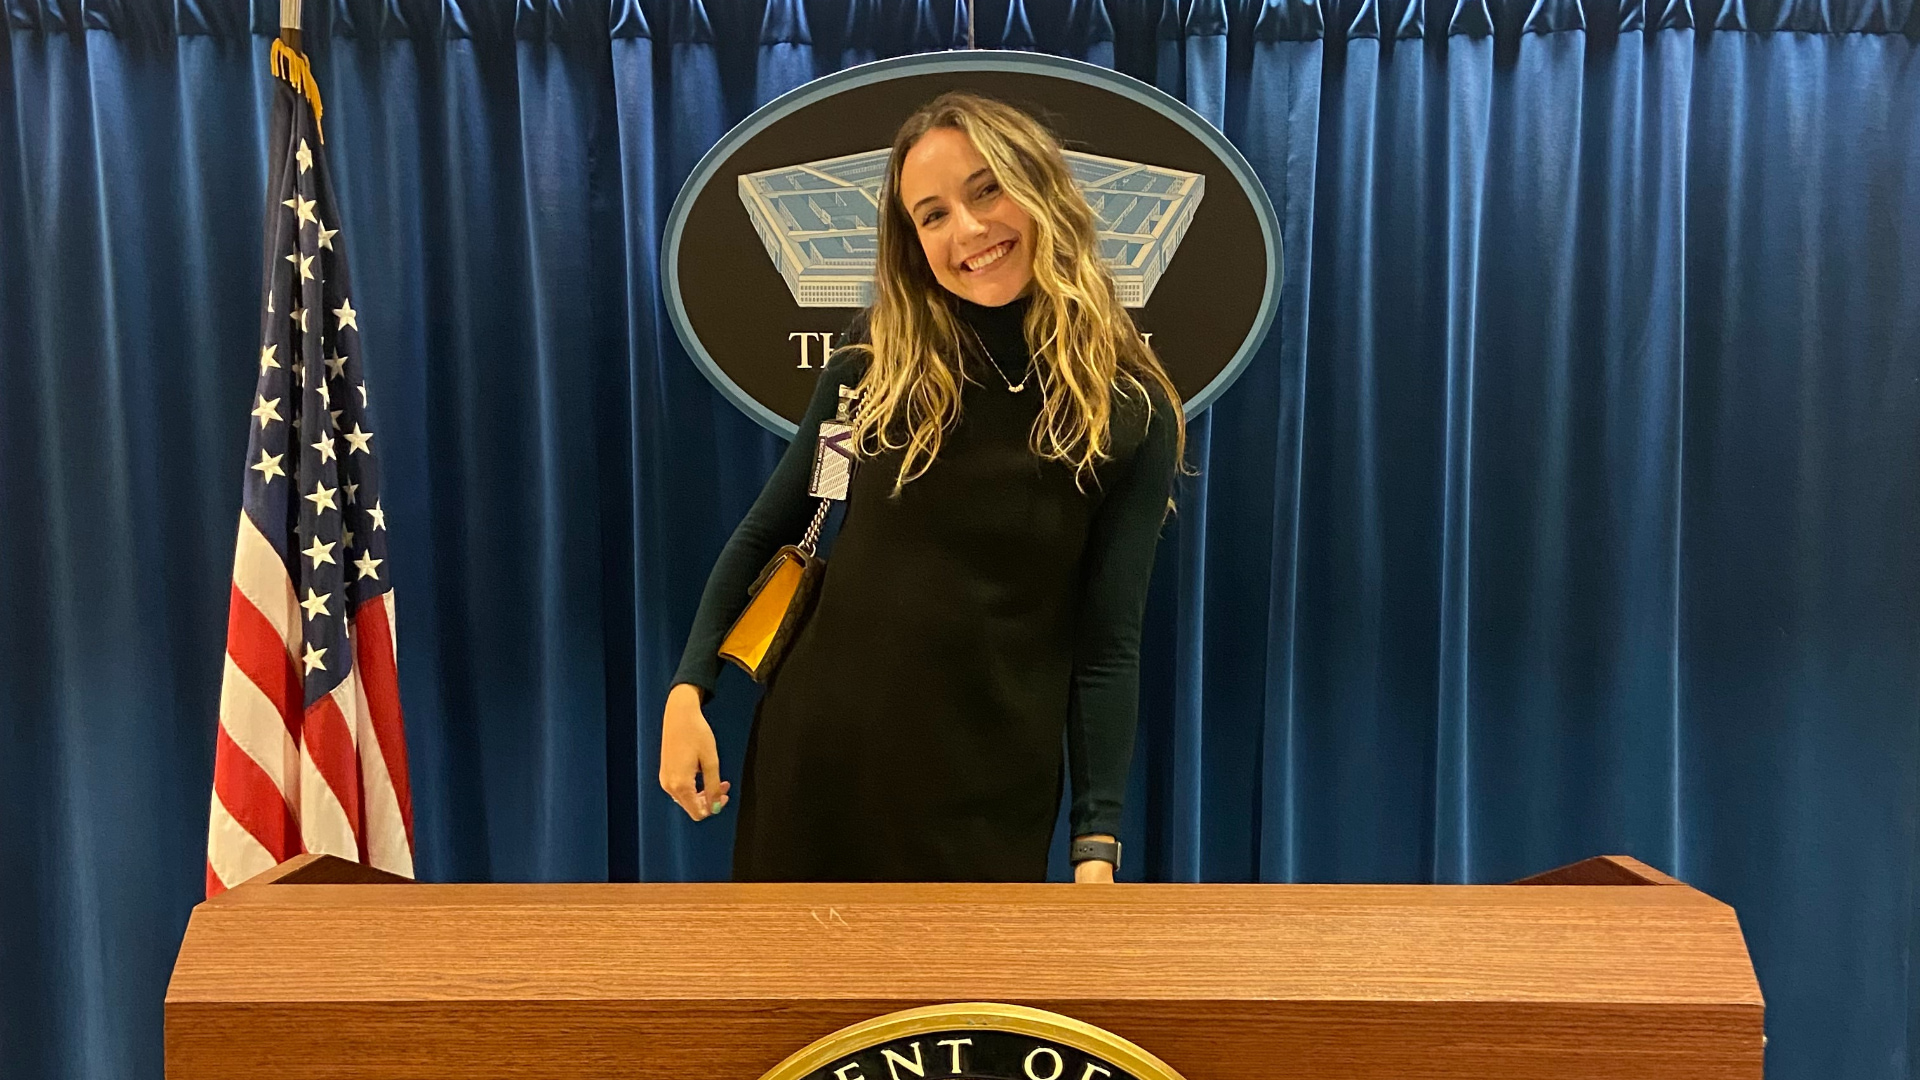 Student standing in front of Department of Defense podium, smiling